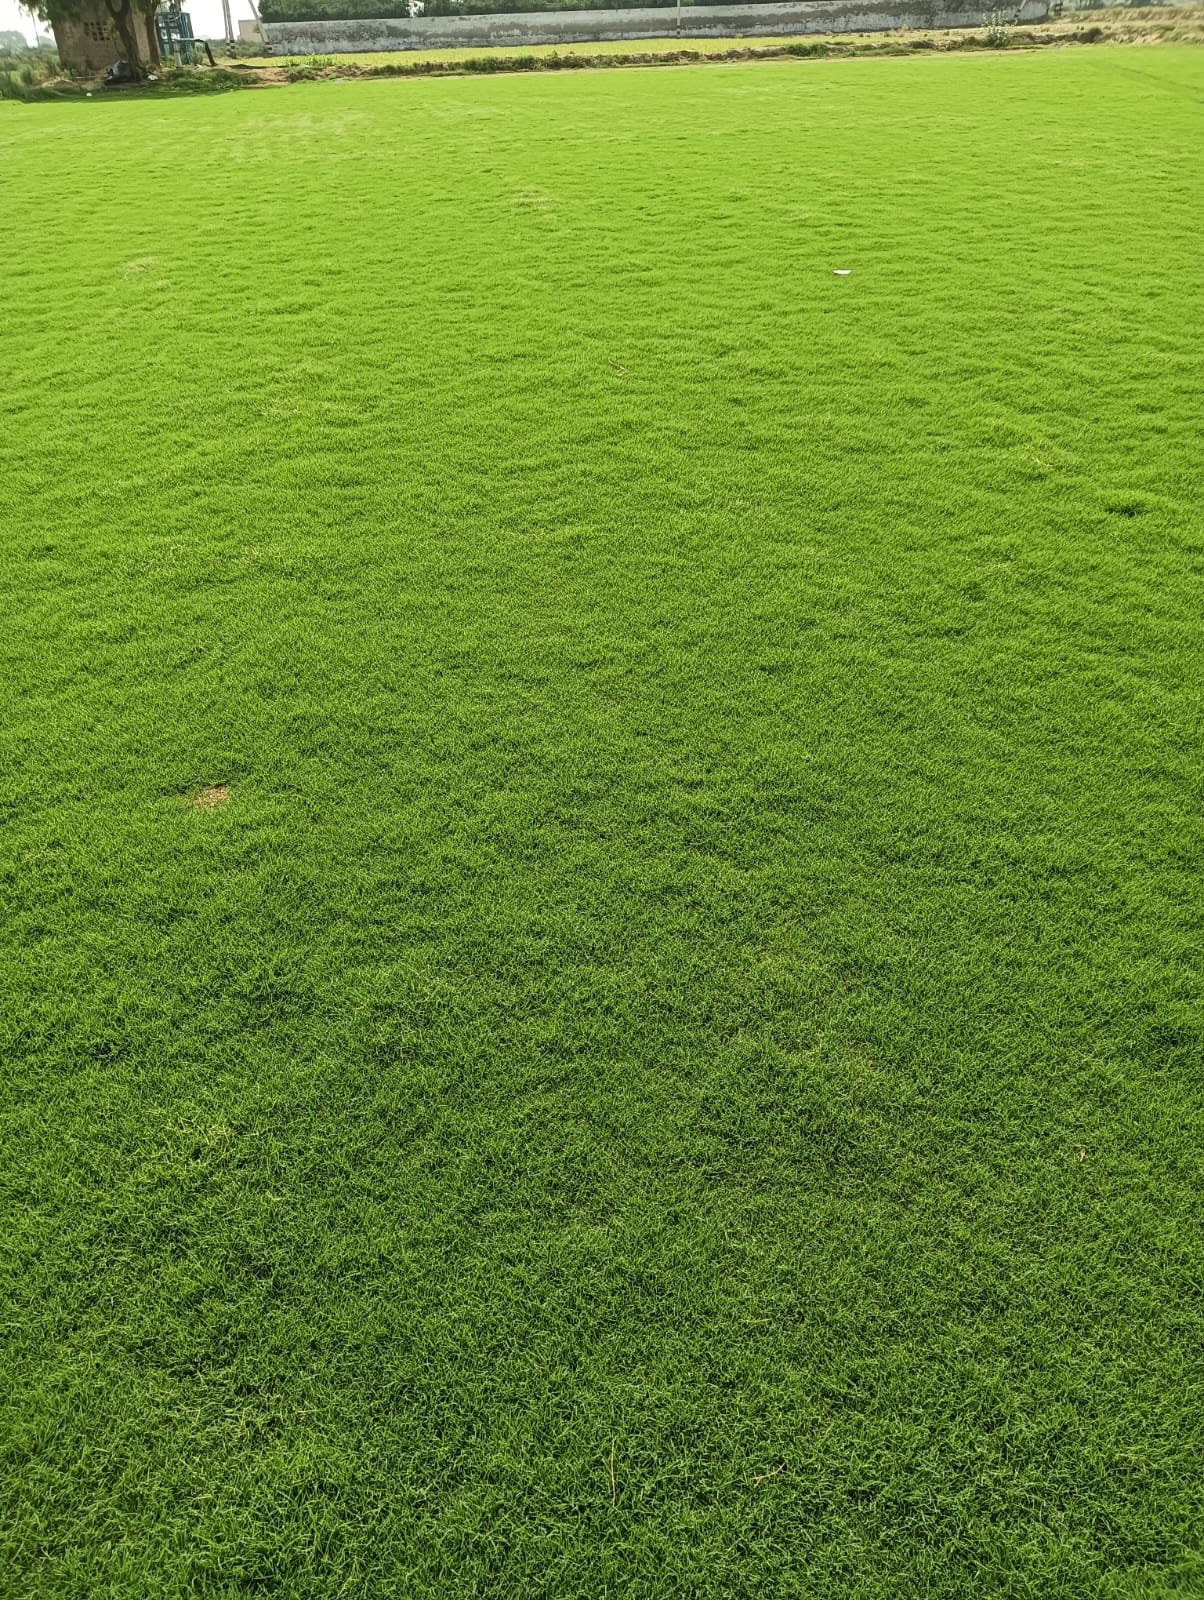 Natural Lawn Grass In Green Park